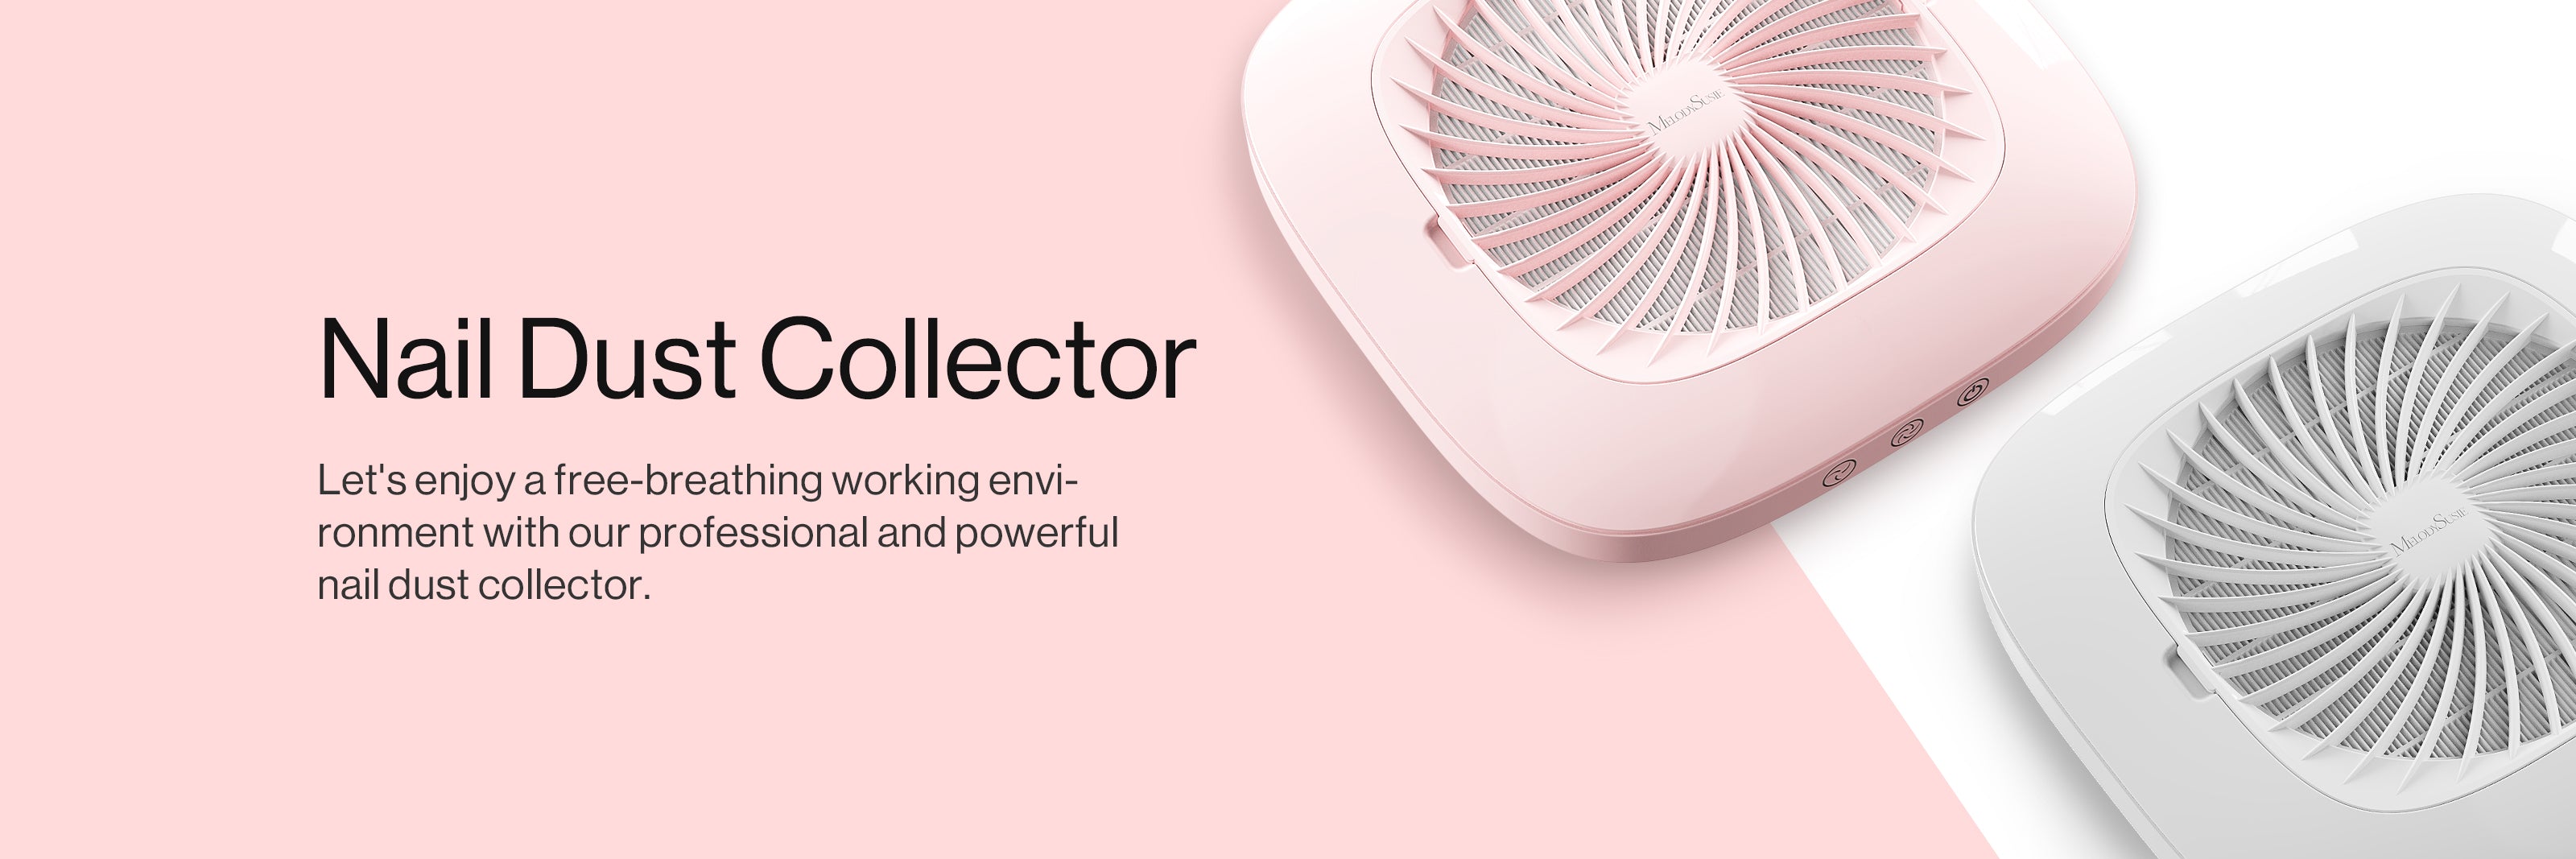 Enjoy Free-breathing Manicure Work - Nail Dust Collector